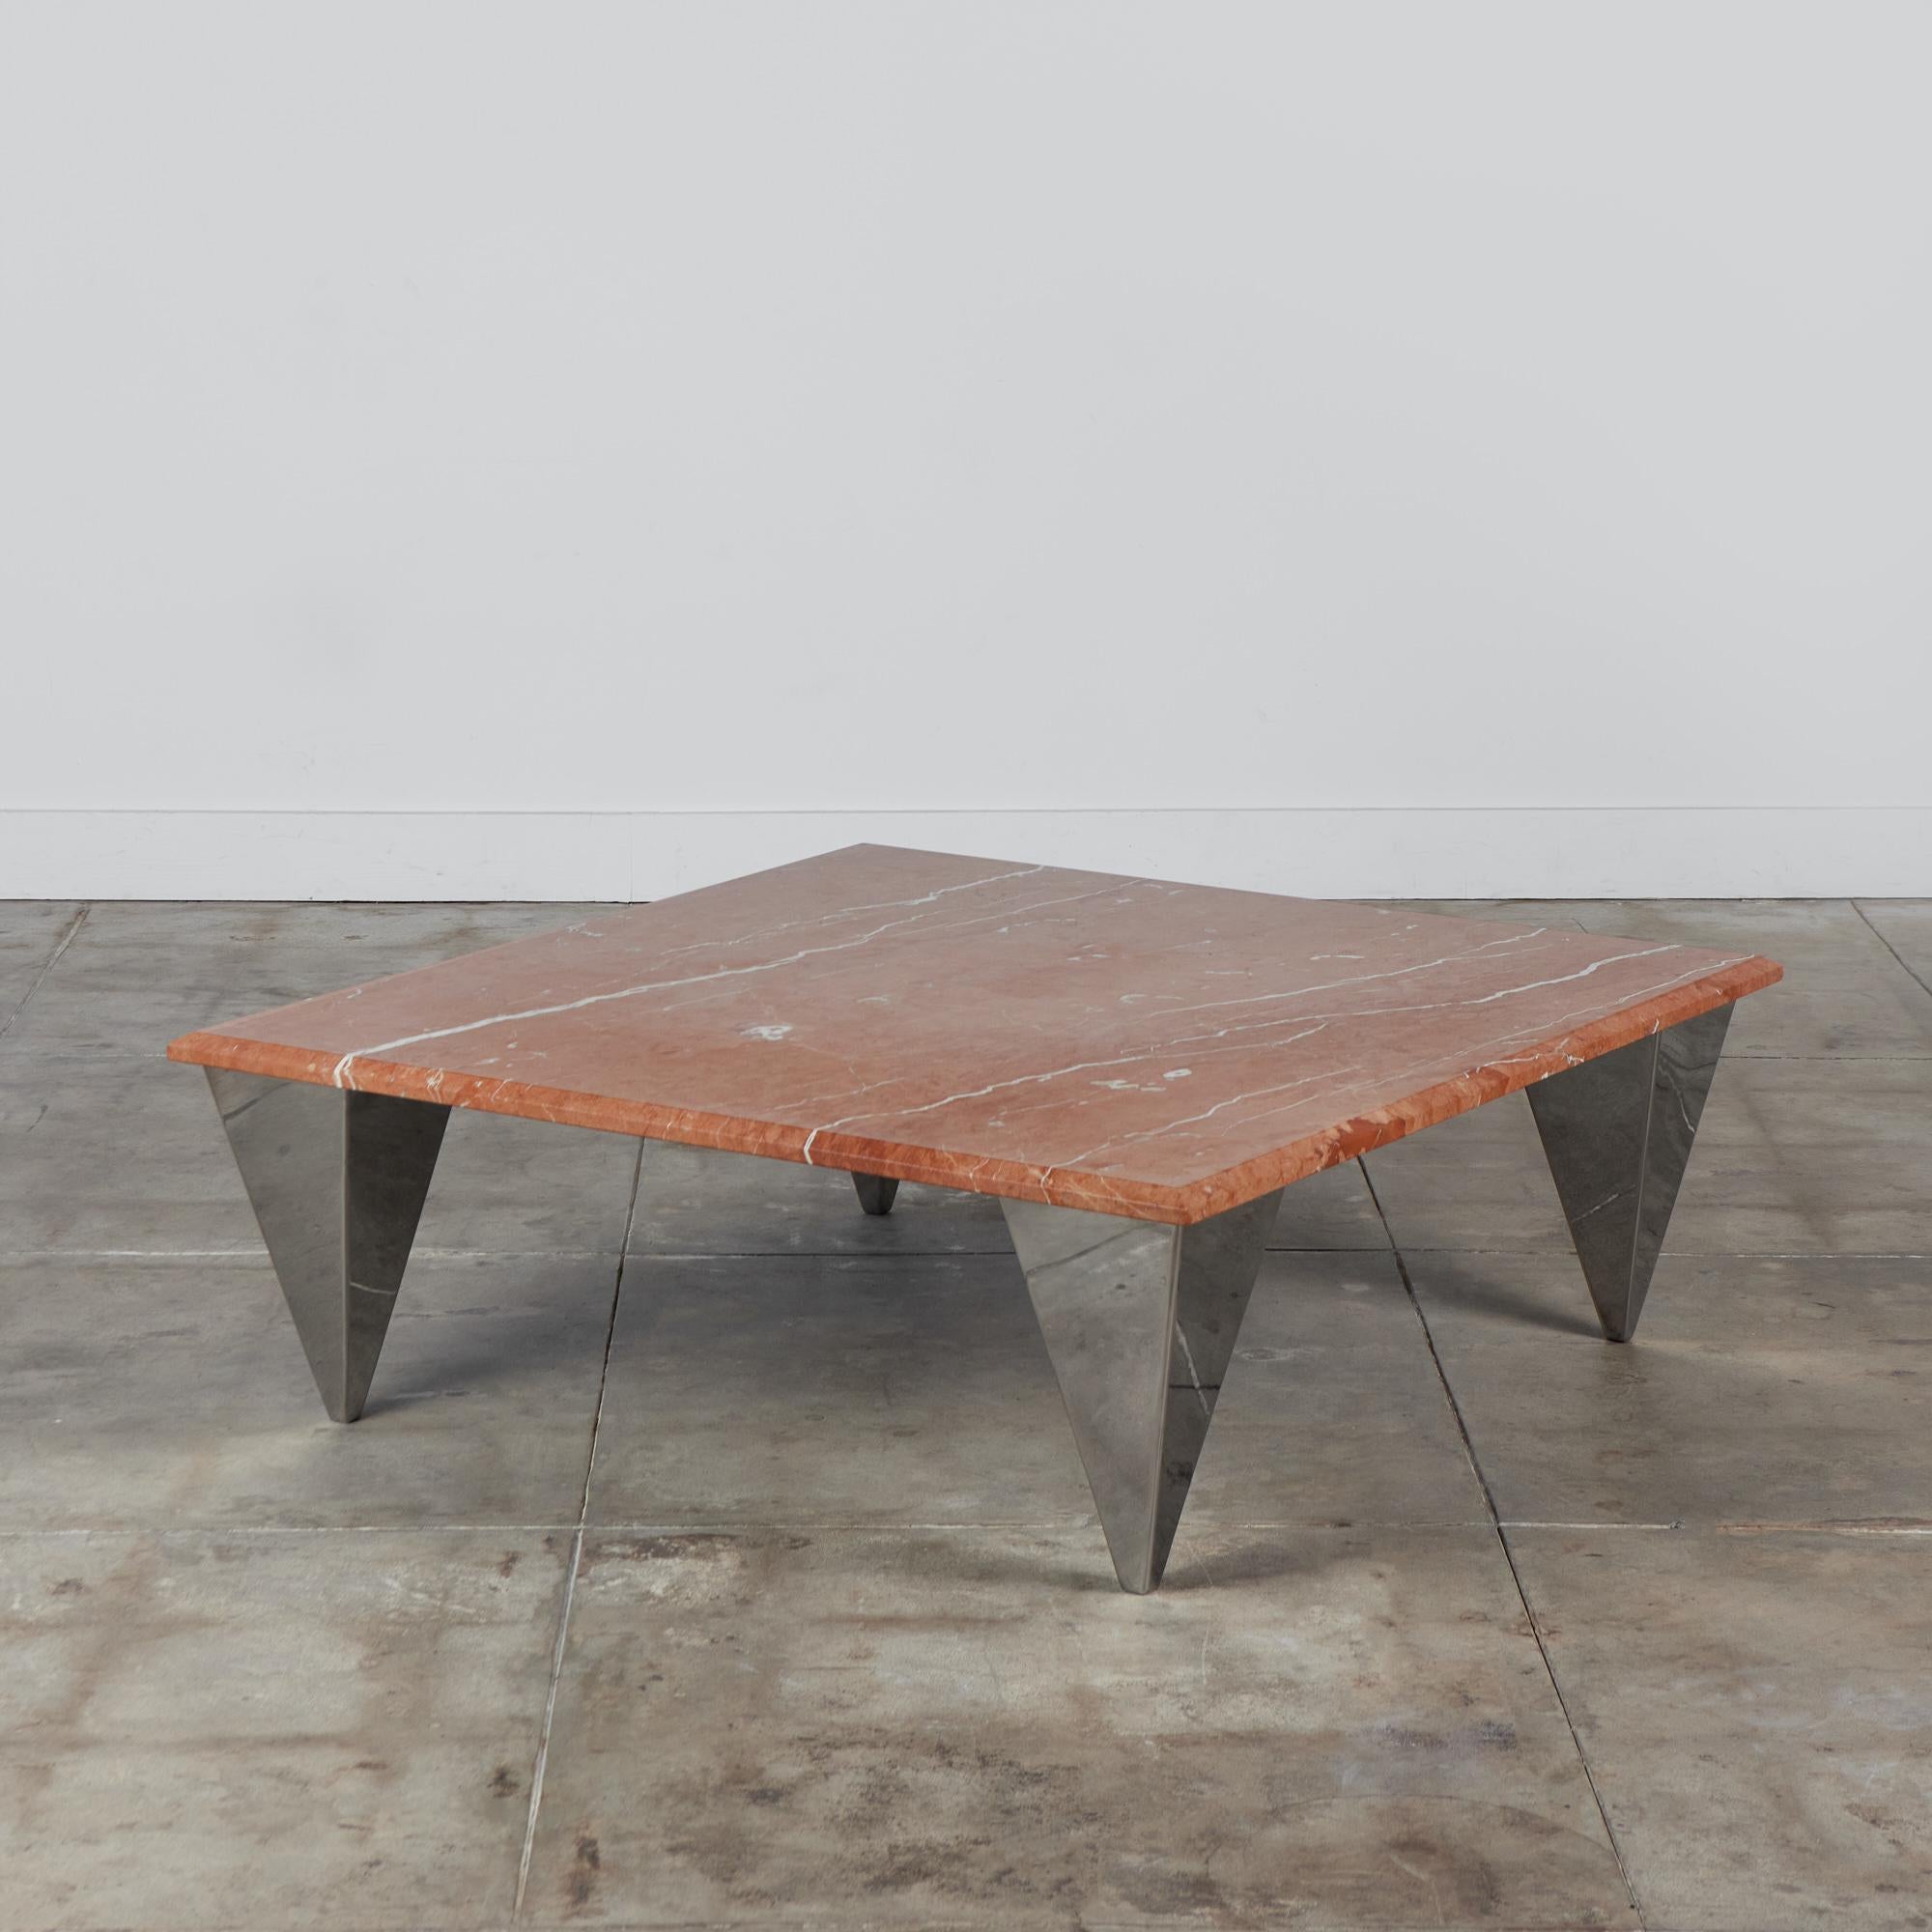 Square red marble postmodern coffee table. The table features a thick square Rojo Alicante marble and four angular chrome legs that taper towards the bottom. The legs reflect the tables surrounds giving it a floating effect.

Dimensions: 50